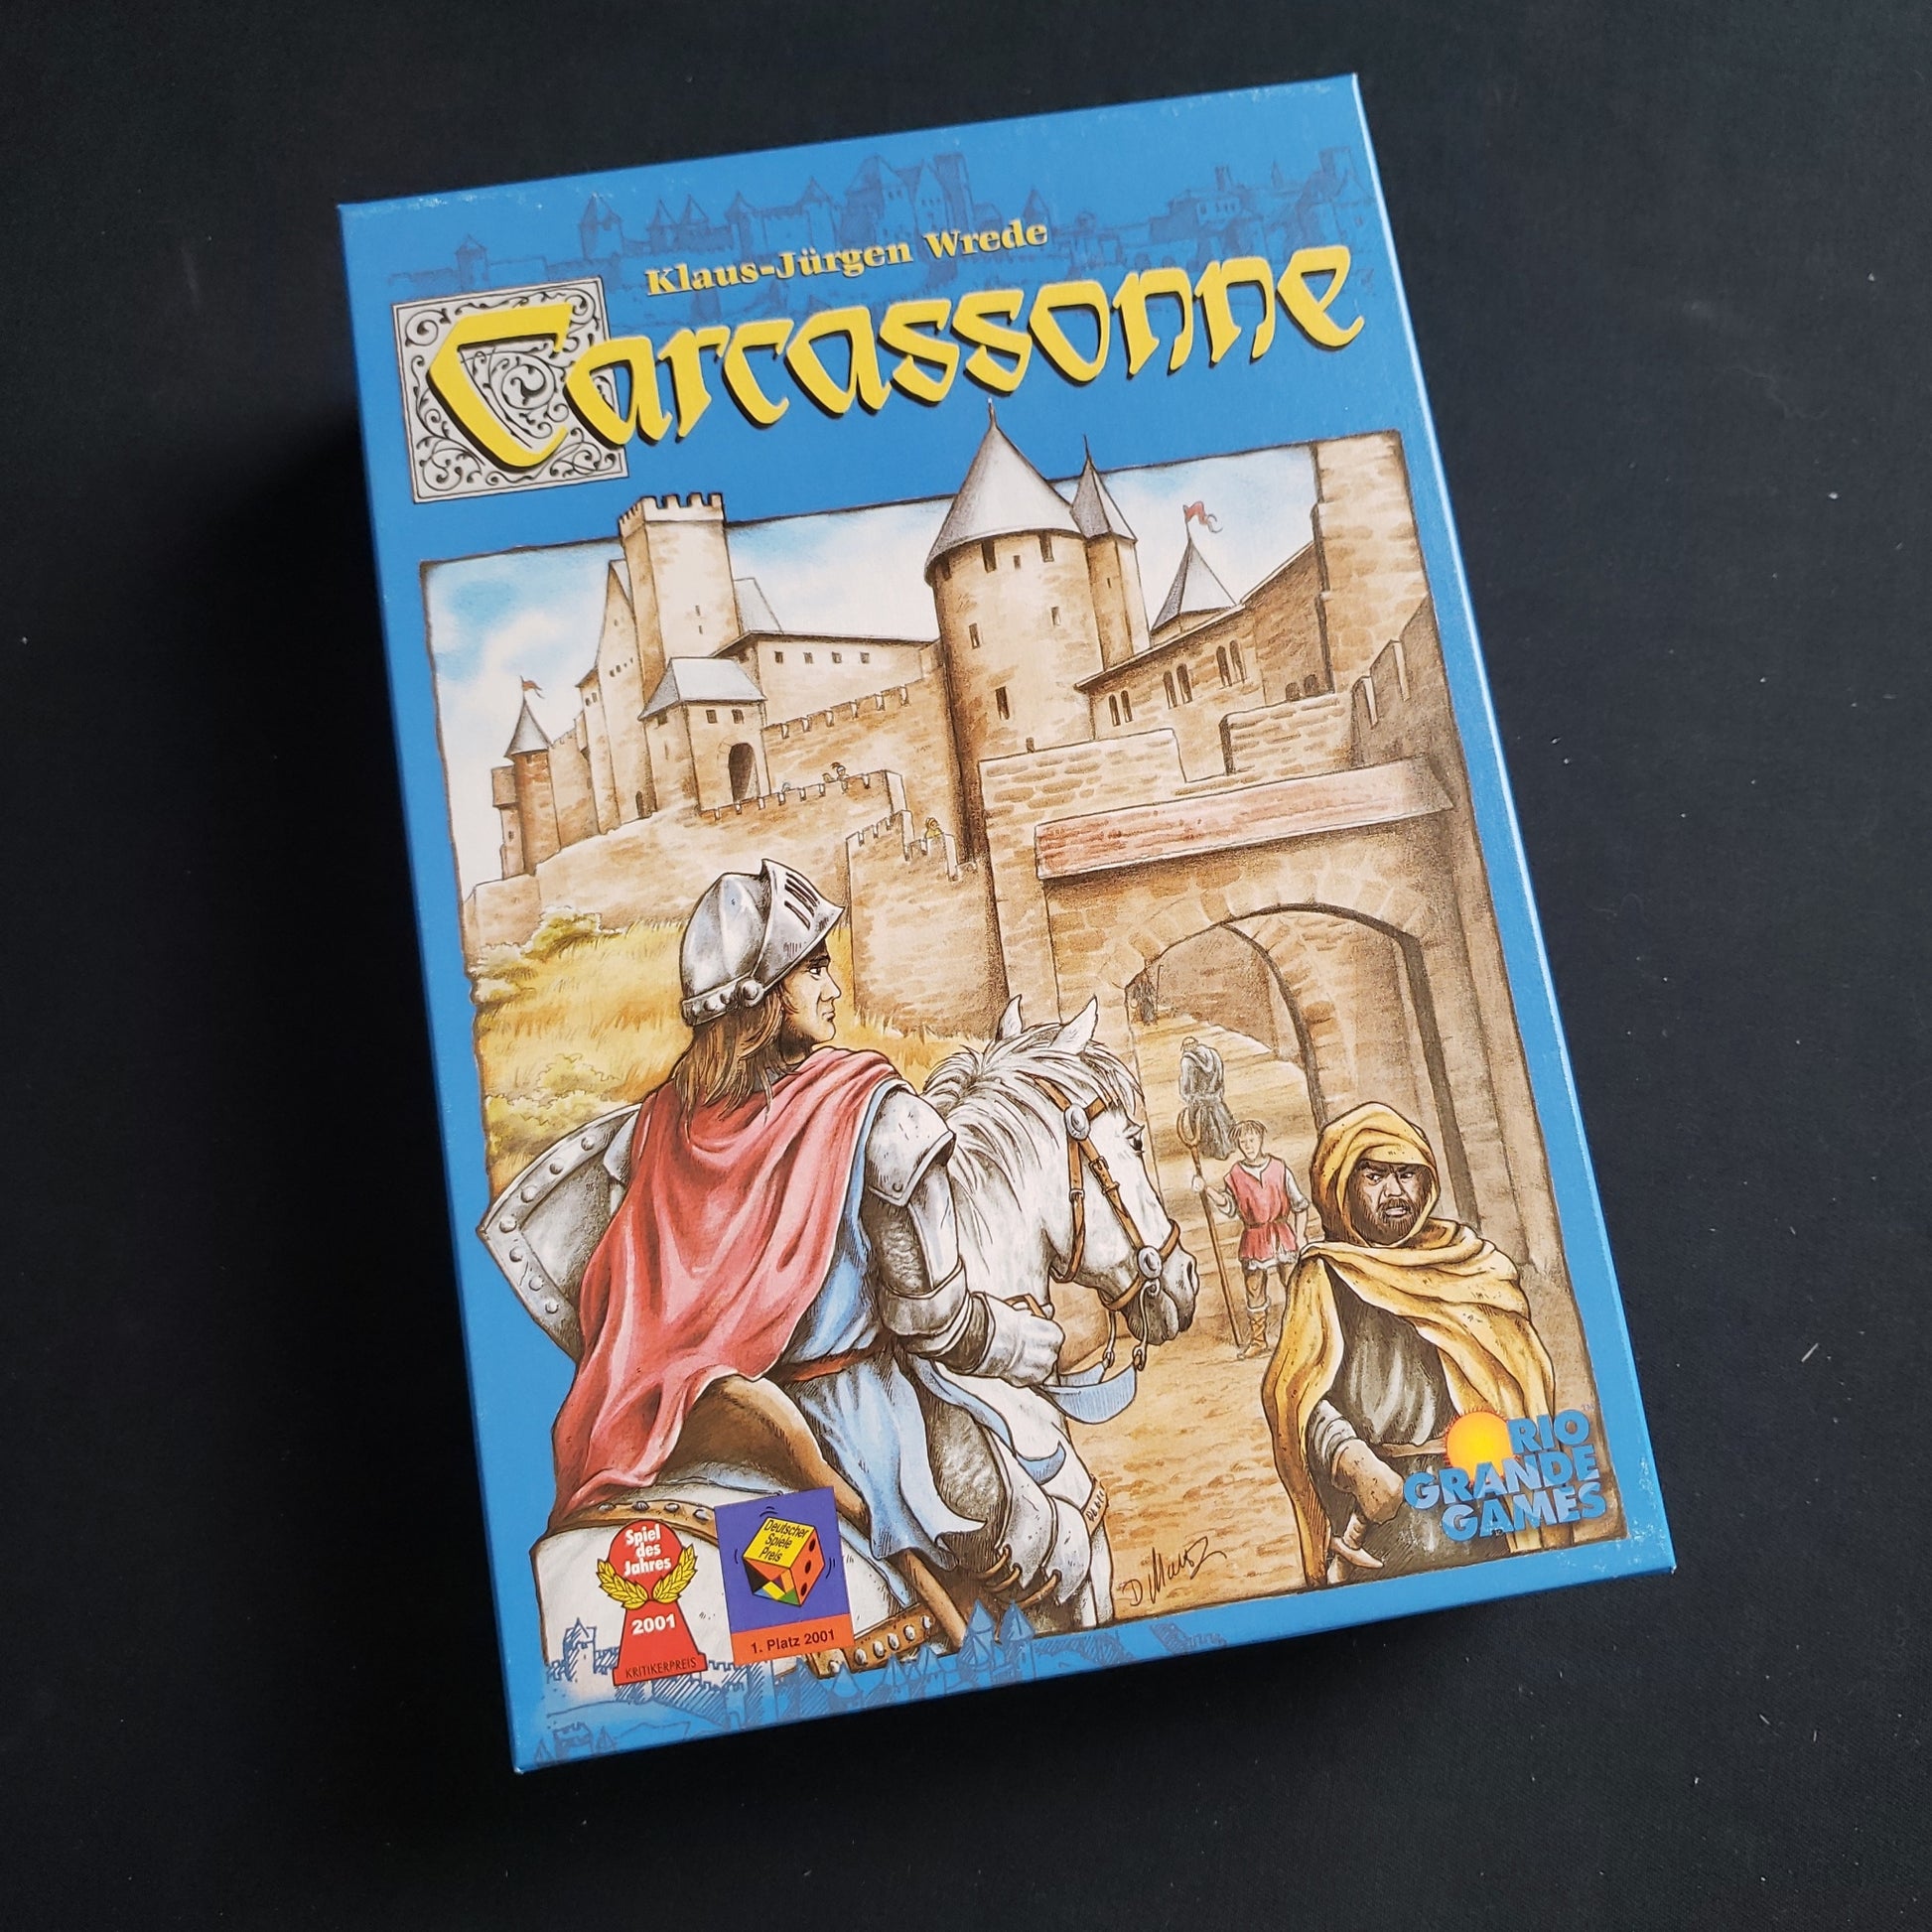 Image shows the front cover of the box of the Carcassonne board game